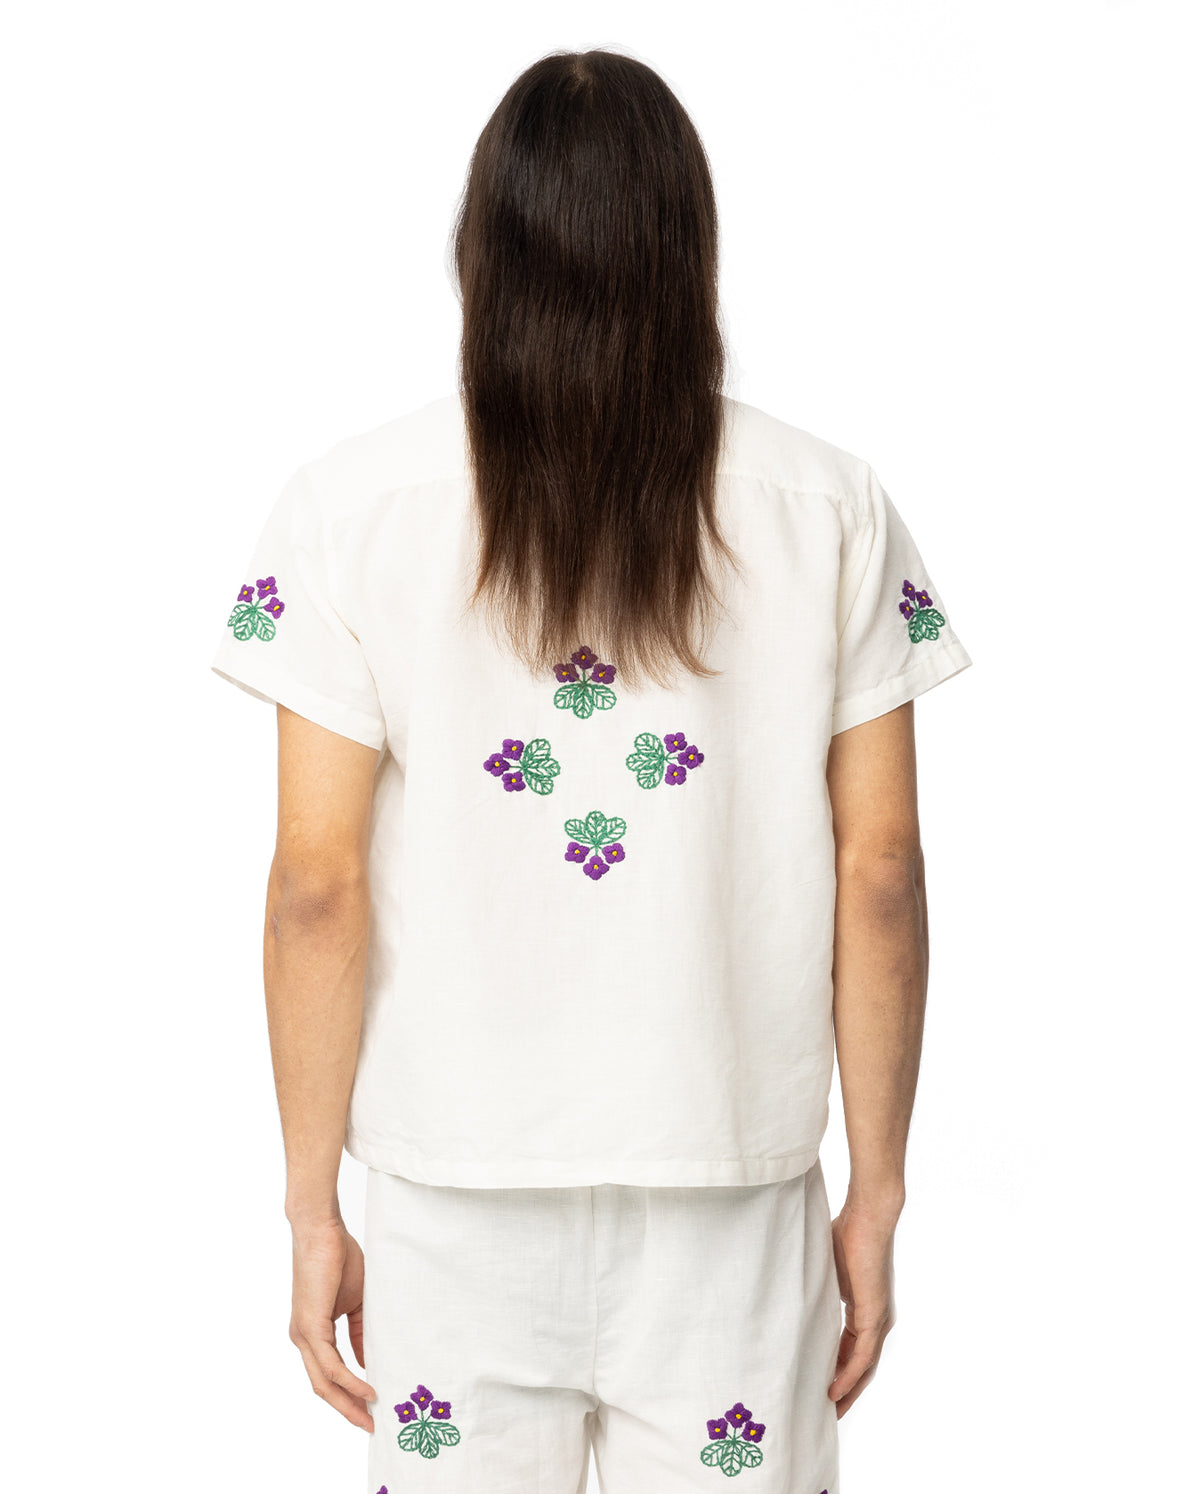 Embroidered Floral Short Sleeve Shirt - White